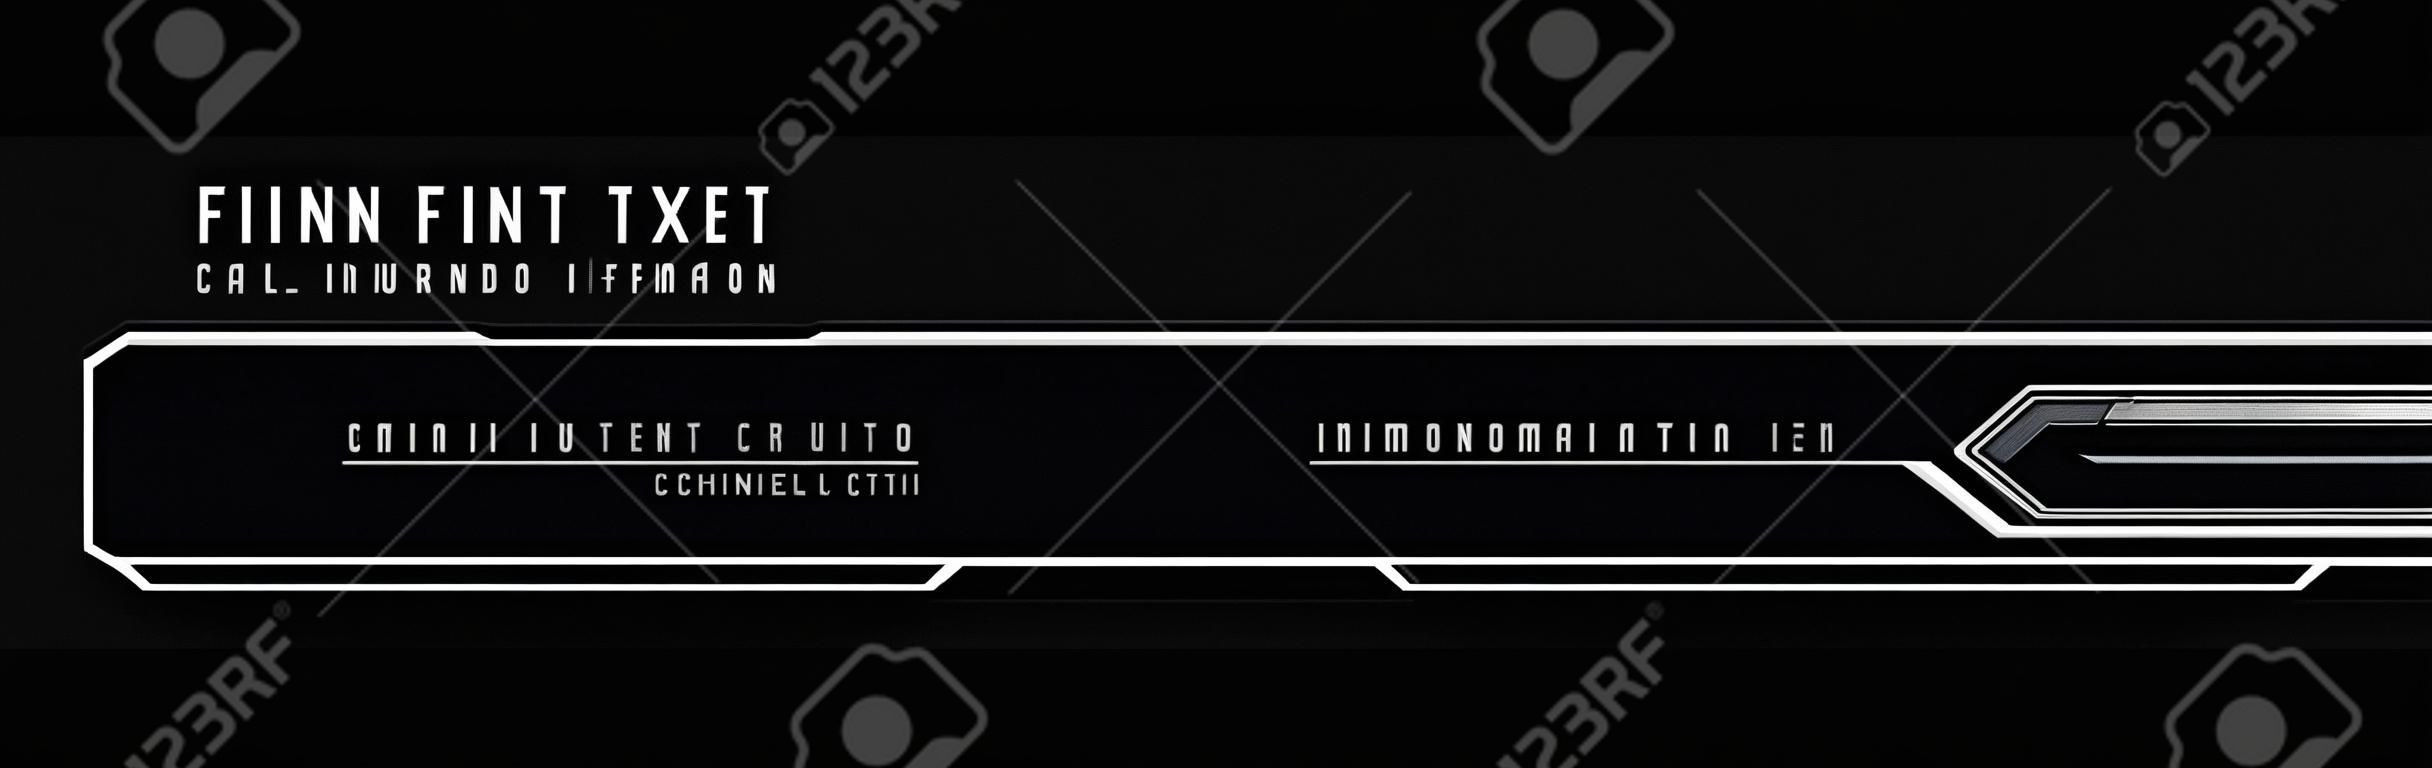 Futuristic lower third. Sci-fi design template for channel, news, information call box bars and modern digital info boxes. Element of hud interface. Modern information callouts. Vector illustration.